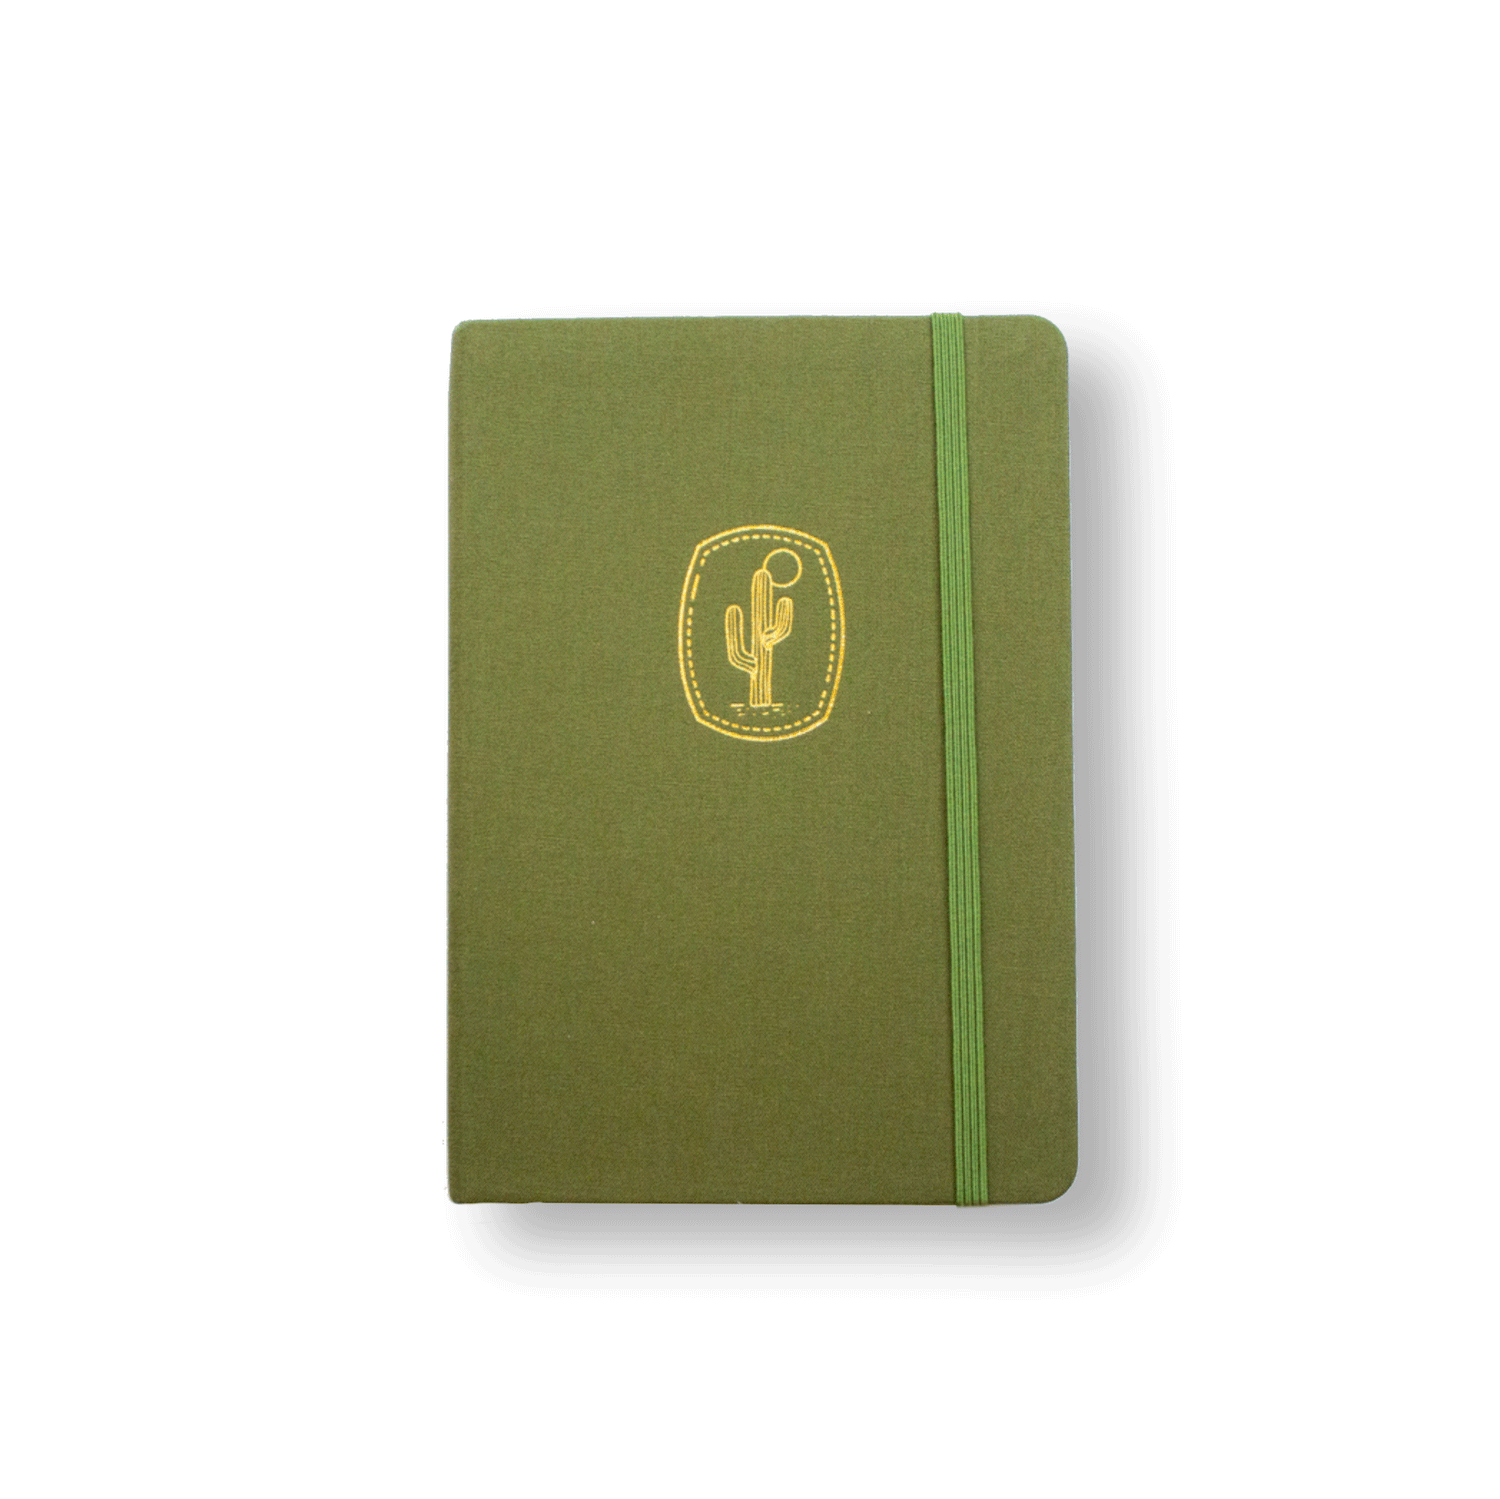 The A5 bobo dot grid Bujo journal in "Cactus" with an cactus green cover. A gold foil Saguaro Cactus and sun illustration is stamped onto the front cover. A corresponding green elastic closure is holding the book closed.